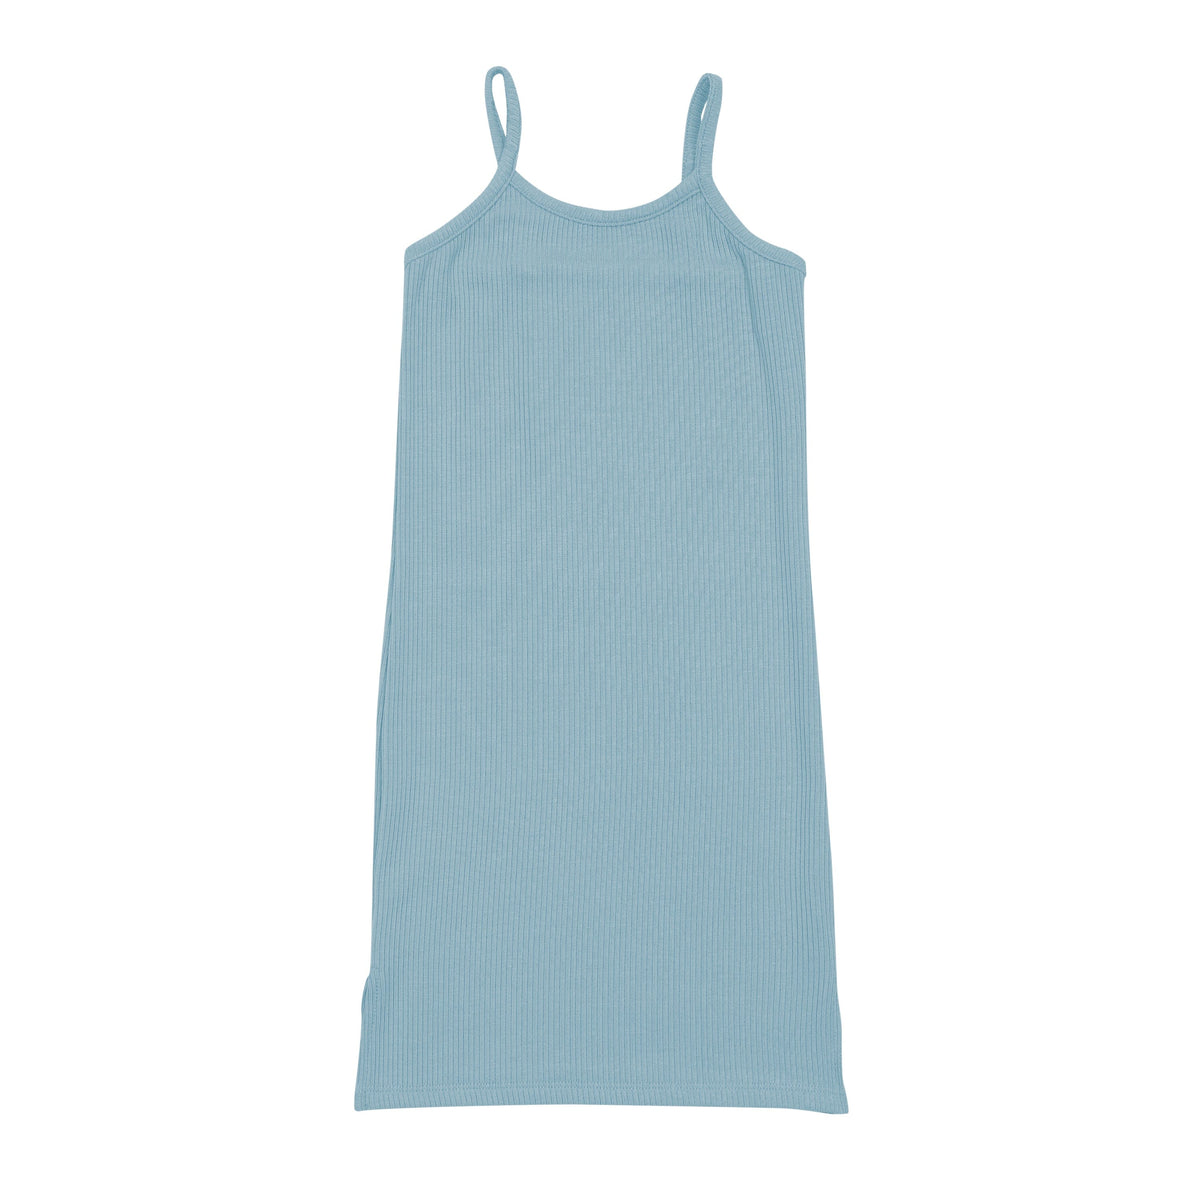 Kyte Baby Ribbed Toddler Cami Dress Ribbed Toddler Cami Dress in Dusty Blue